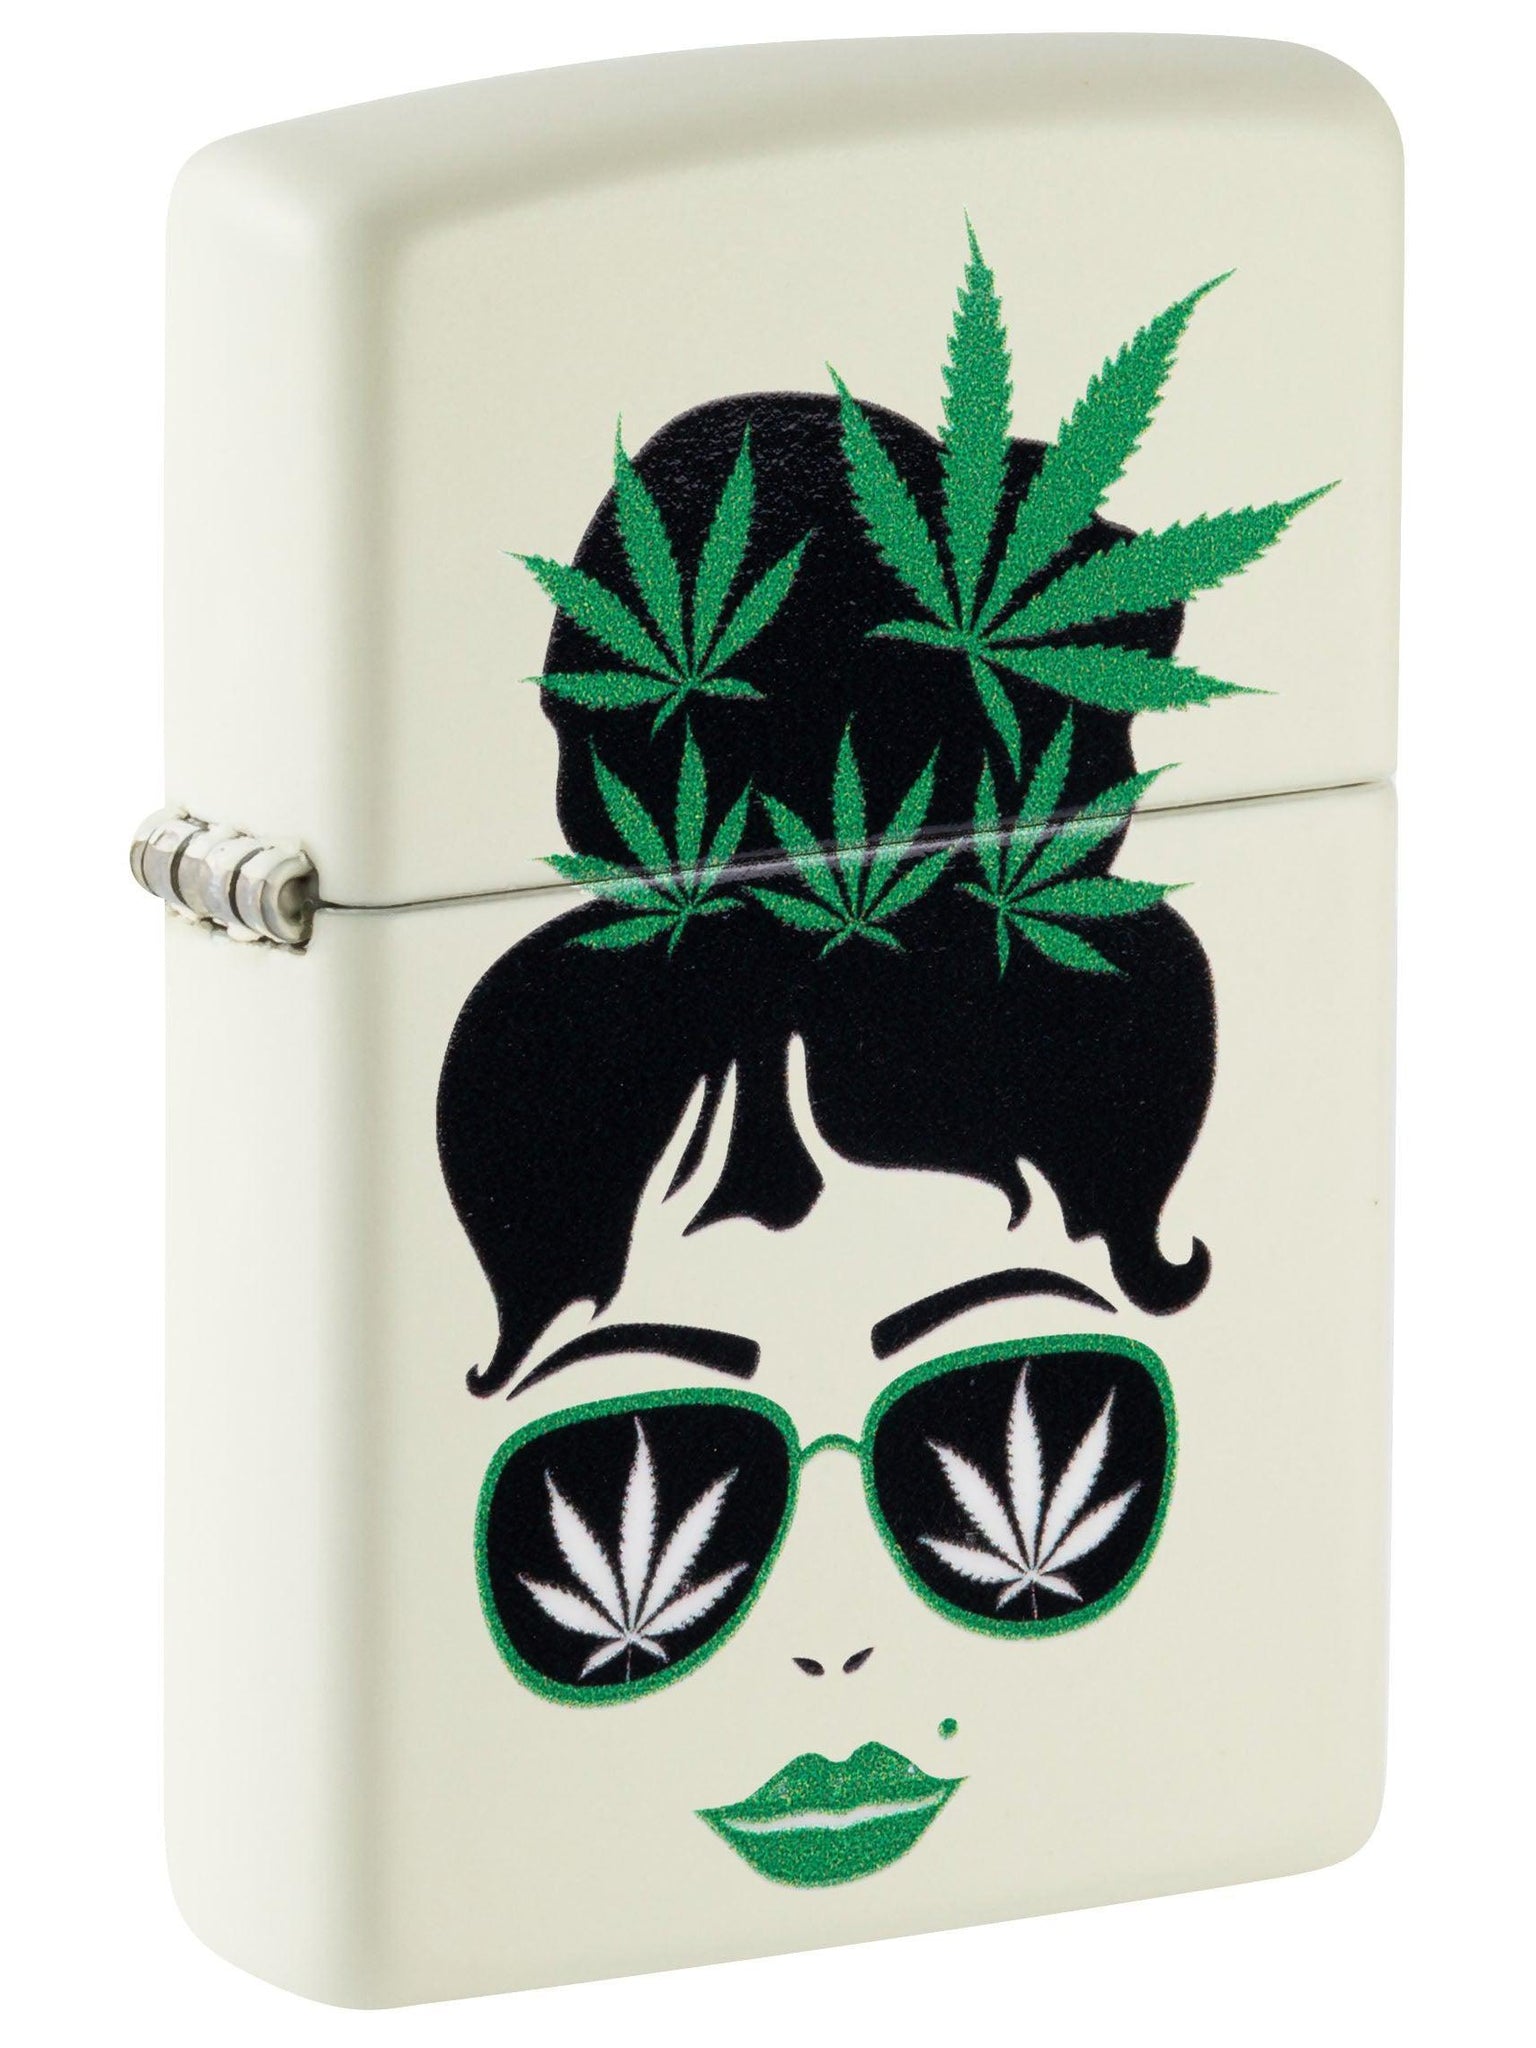 Zippo Lighter: Lady with Weed Leaves - Glow in the Dark 49837